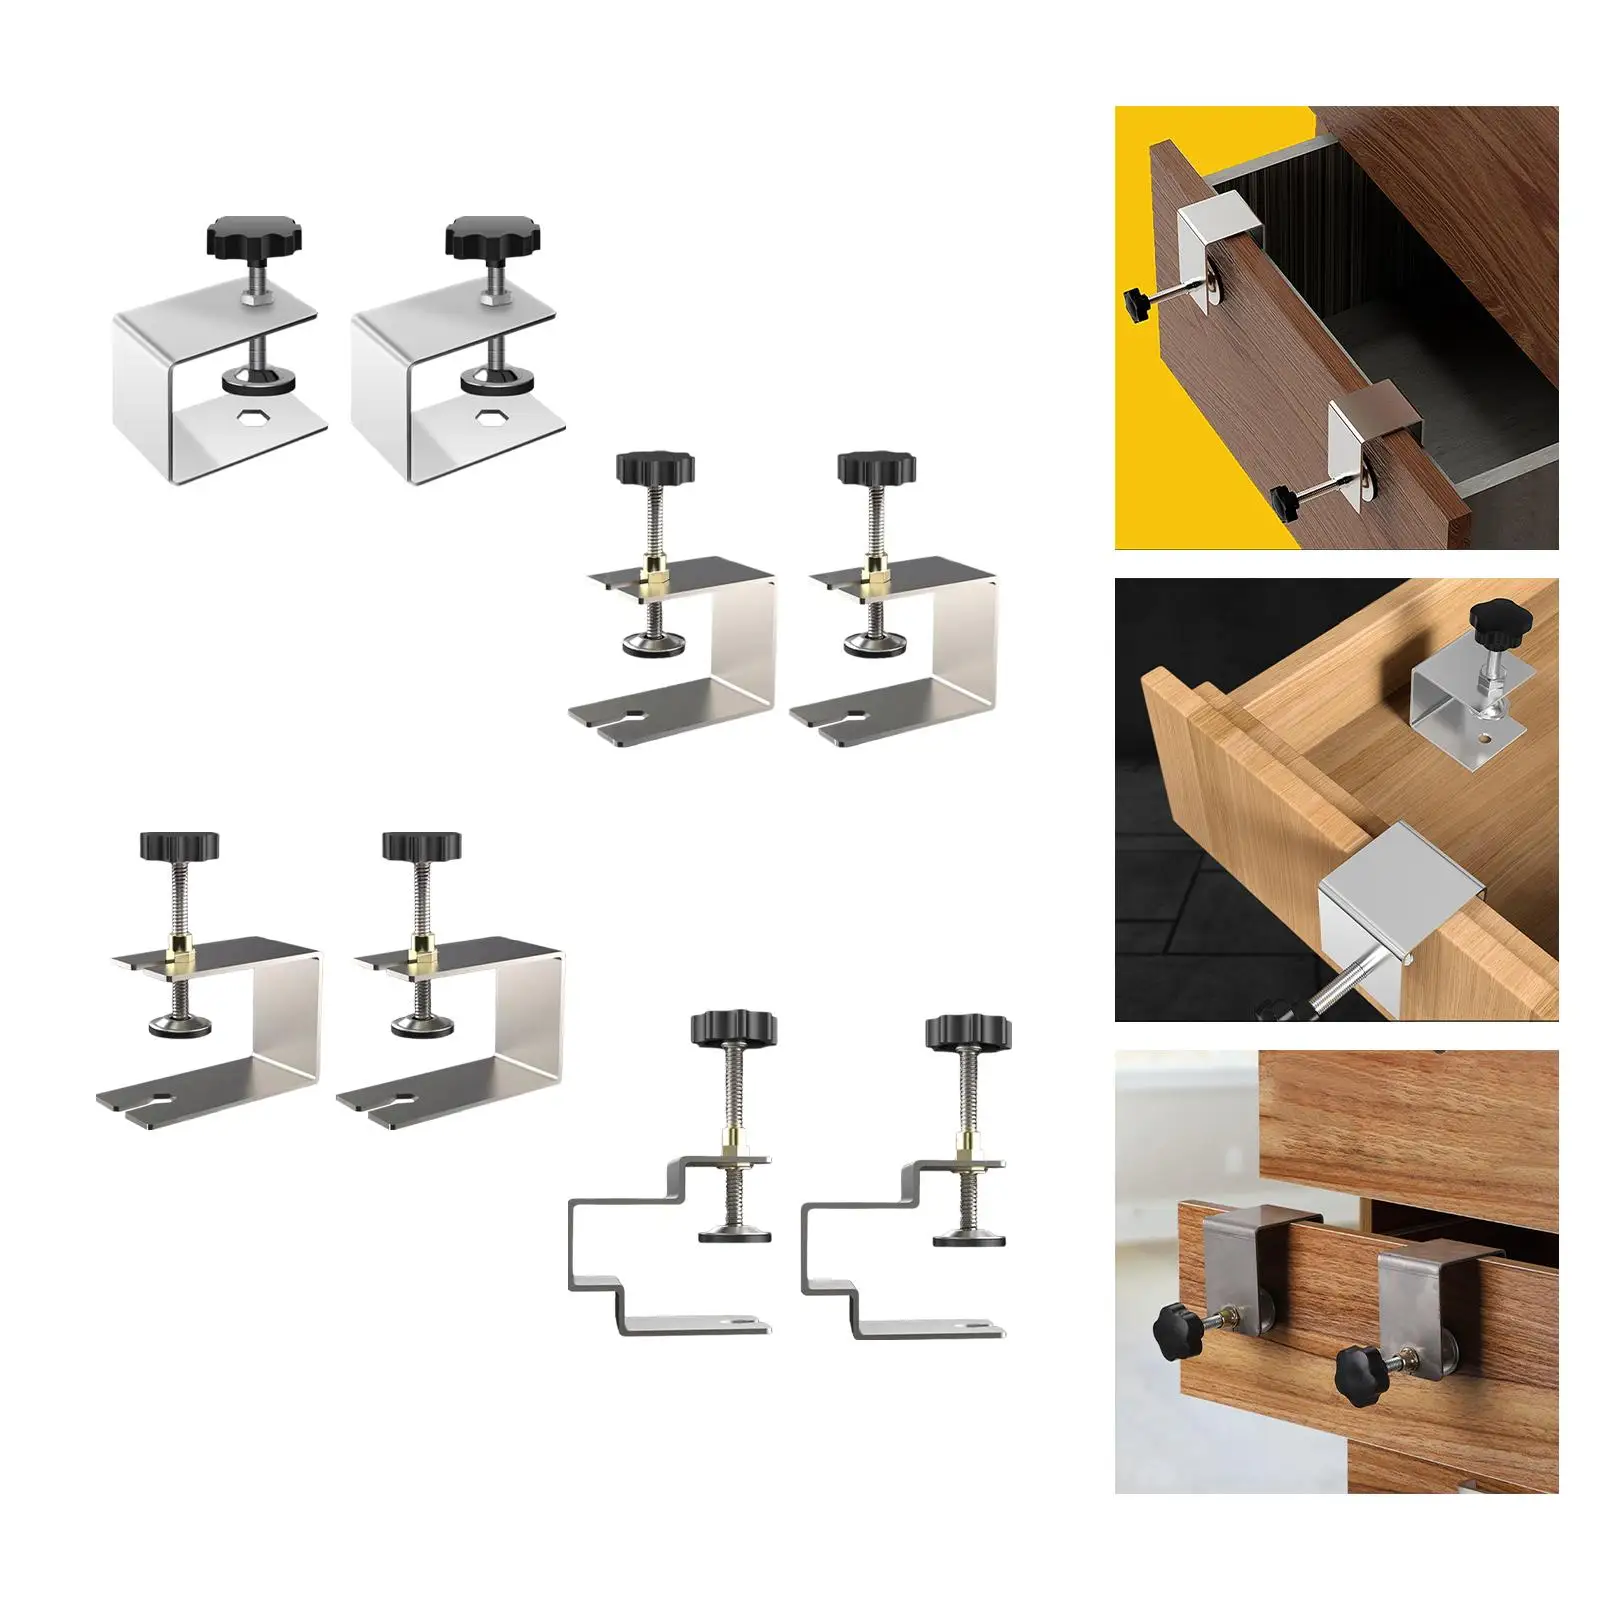 2Pcs Stainless Steel Woodworking Clamp Adjustment Drawer Front Mounting Clamp Hardware Accessories Smooth Fasten Stable